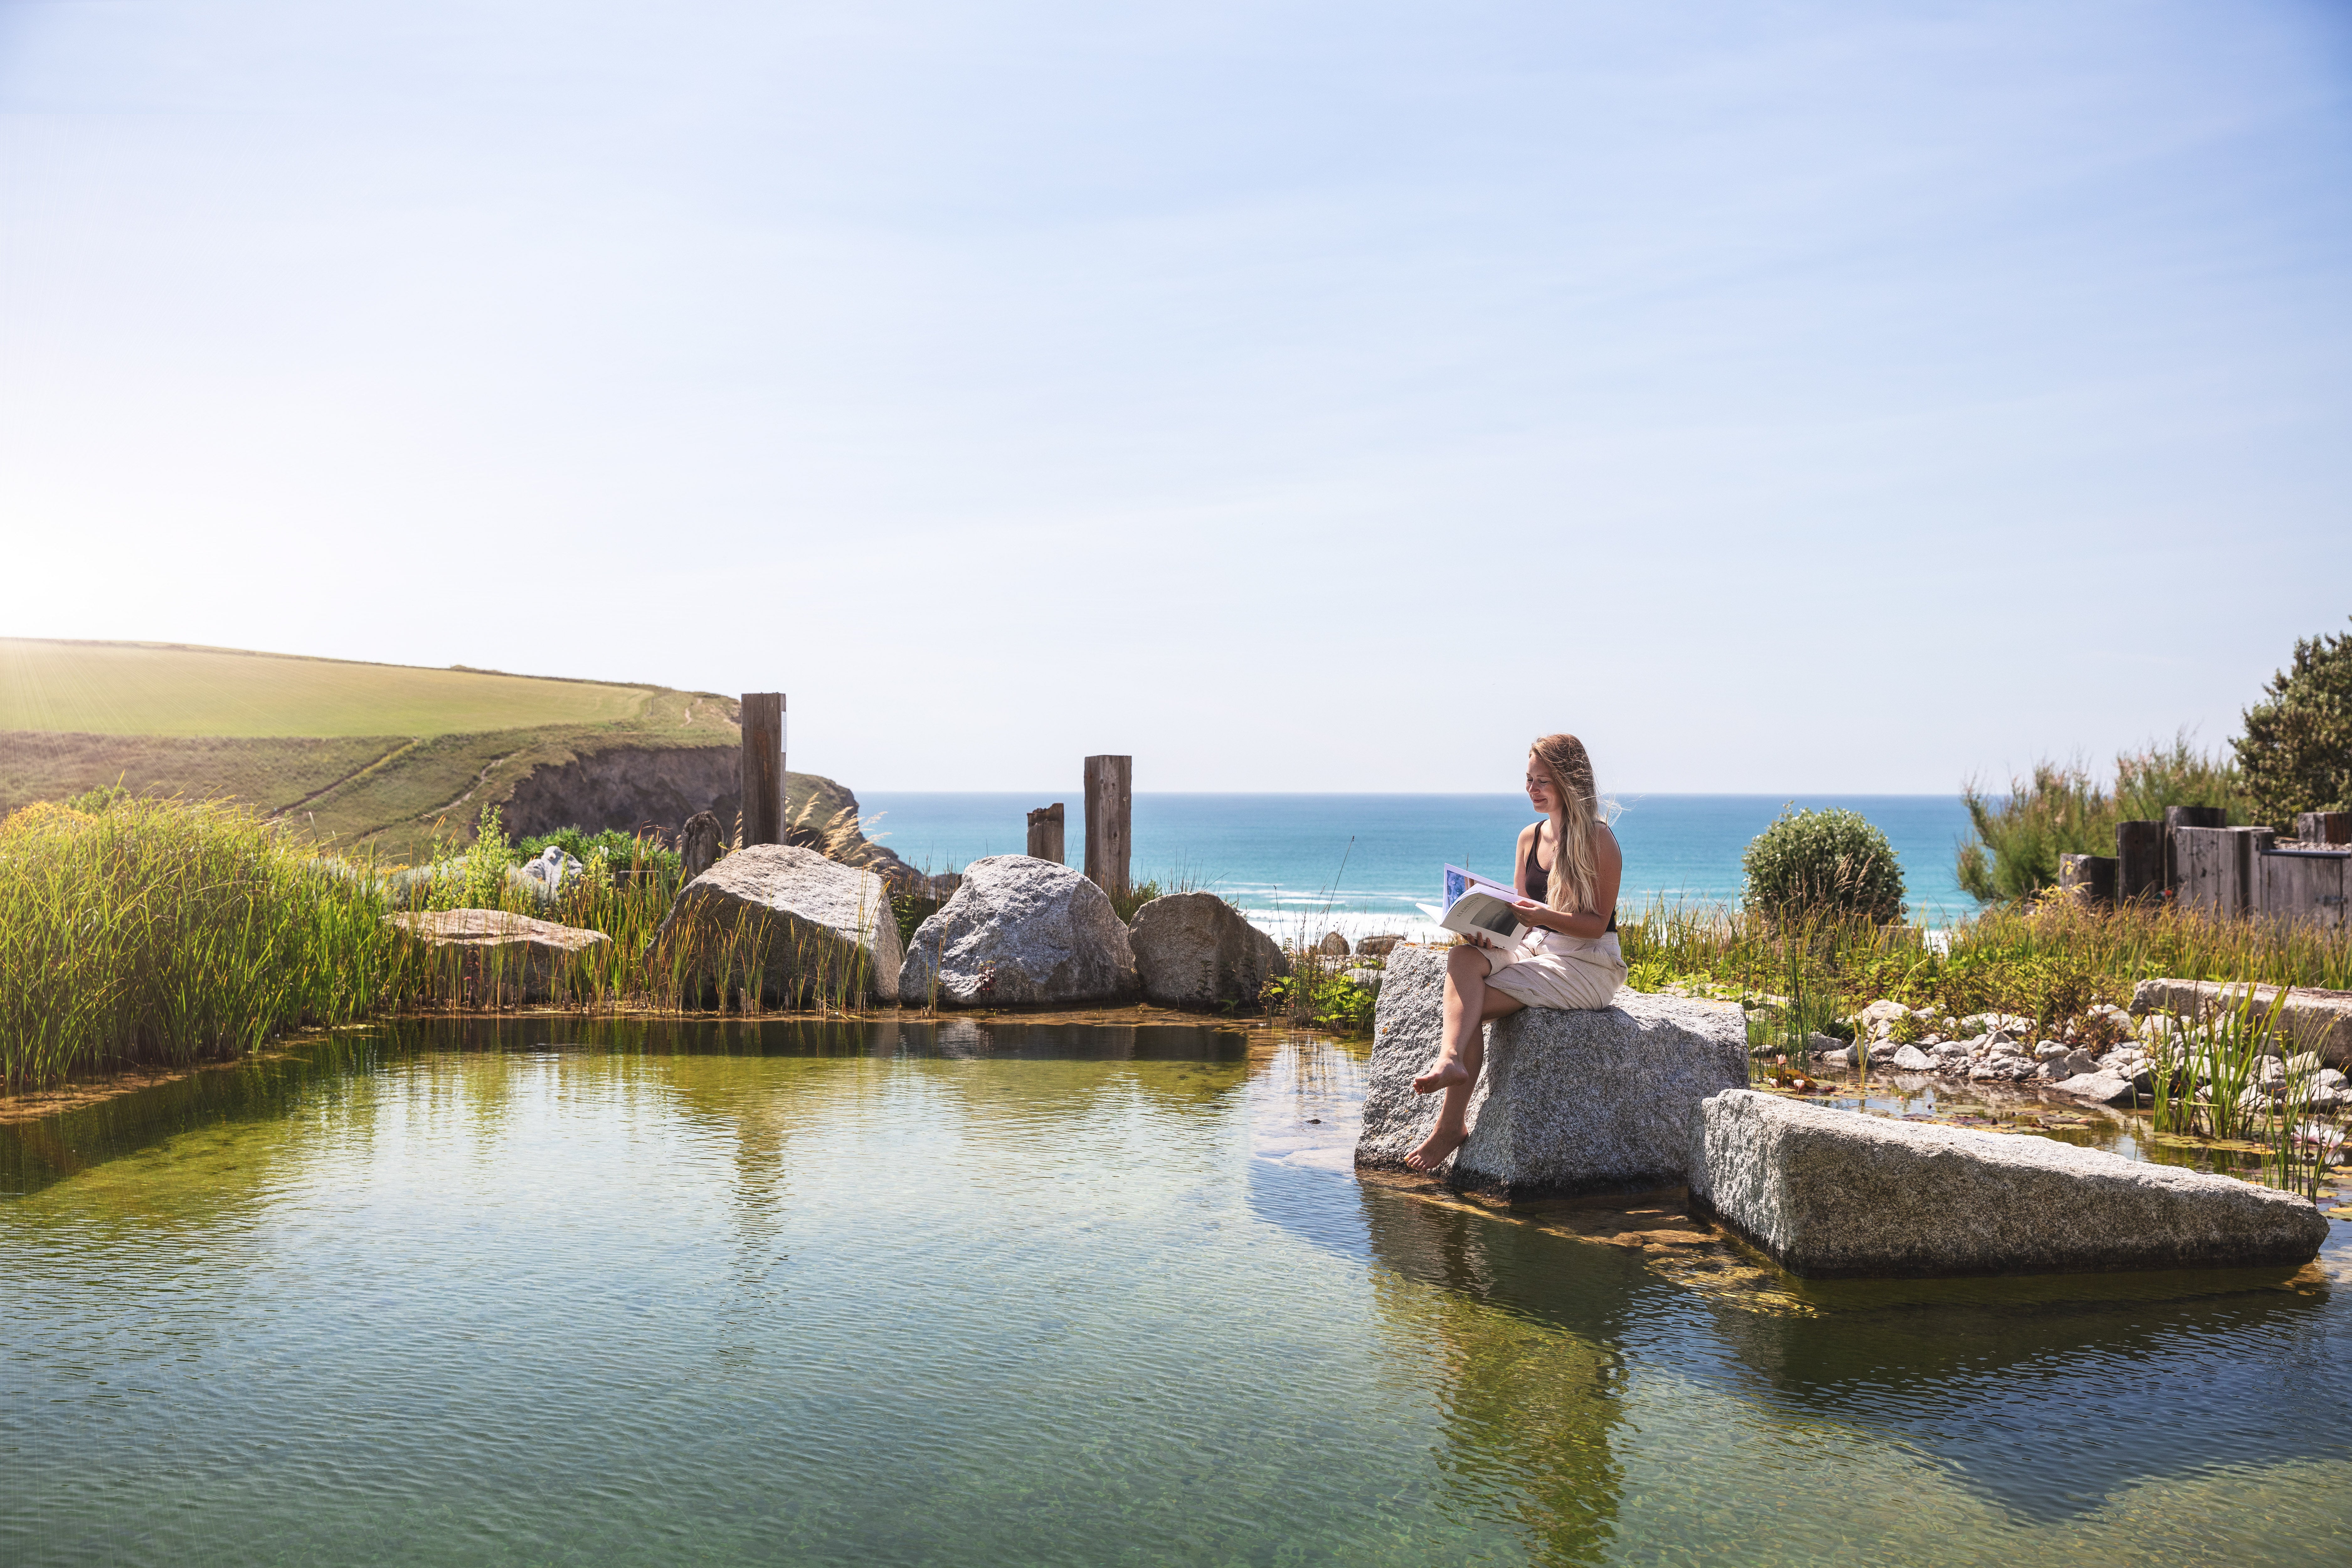 Immerse yourself in nature at The Scarlet’s natural outdoor pool